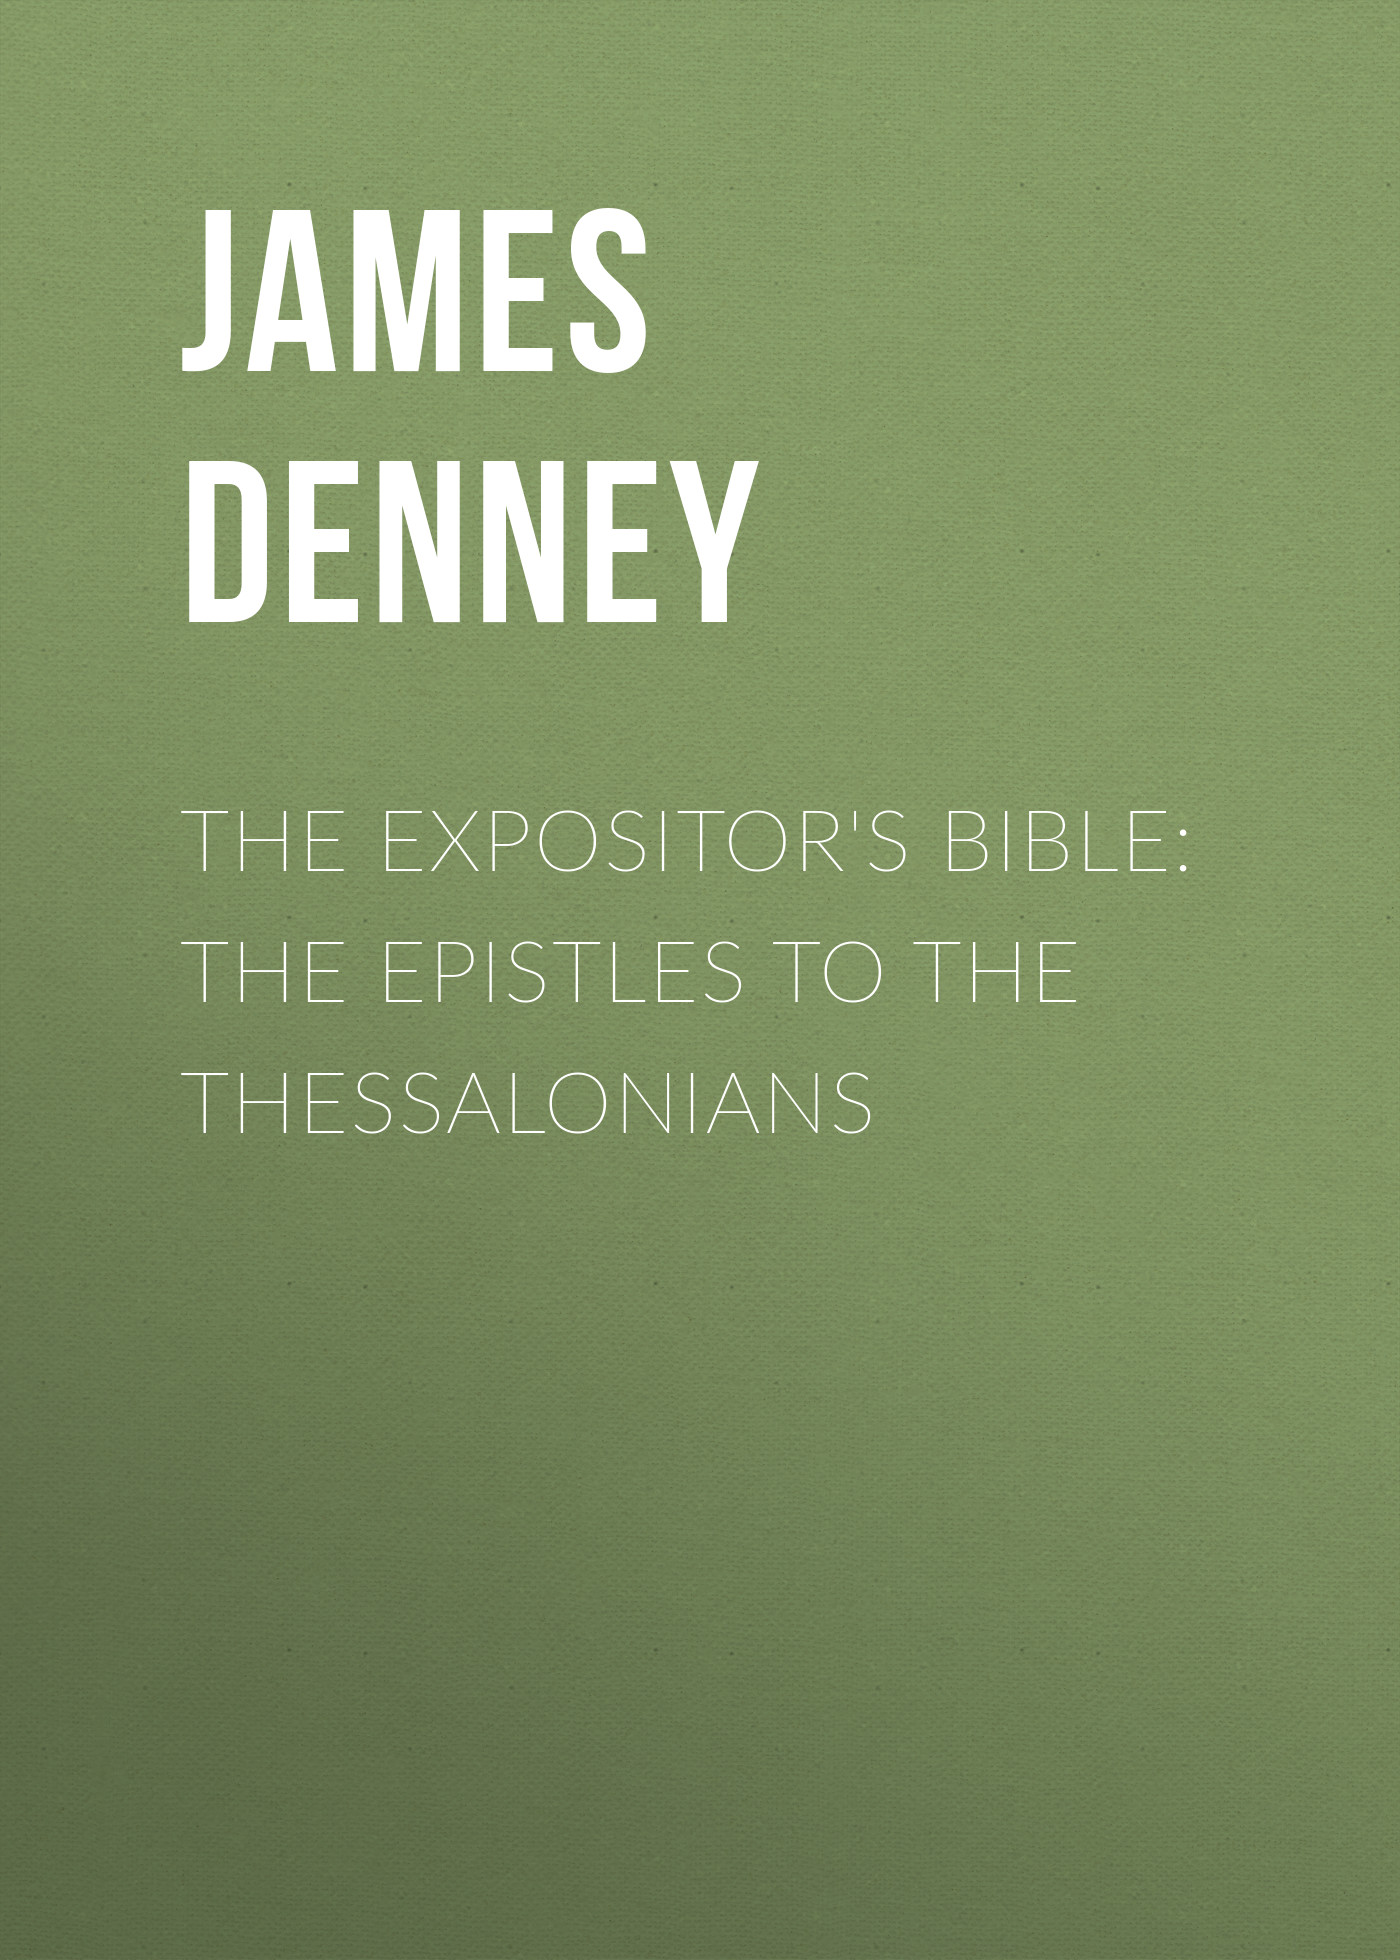 The Expositor's Bible: The Epistles to the Thessalonians